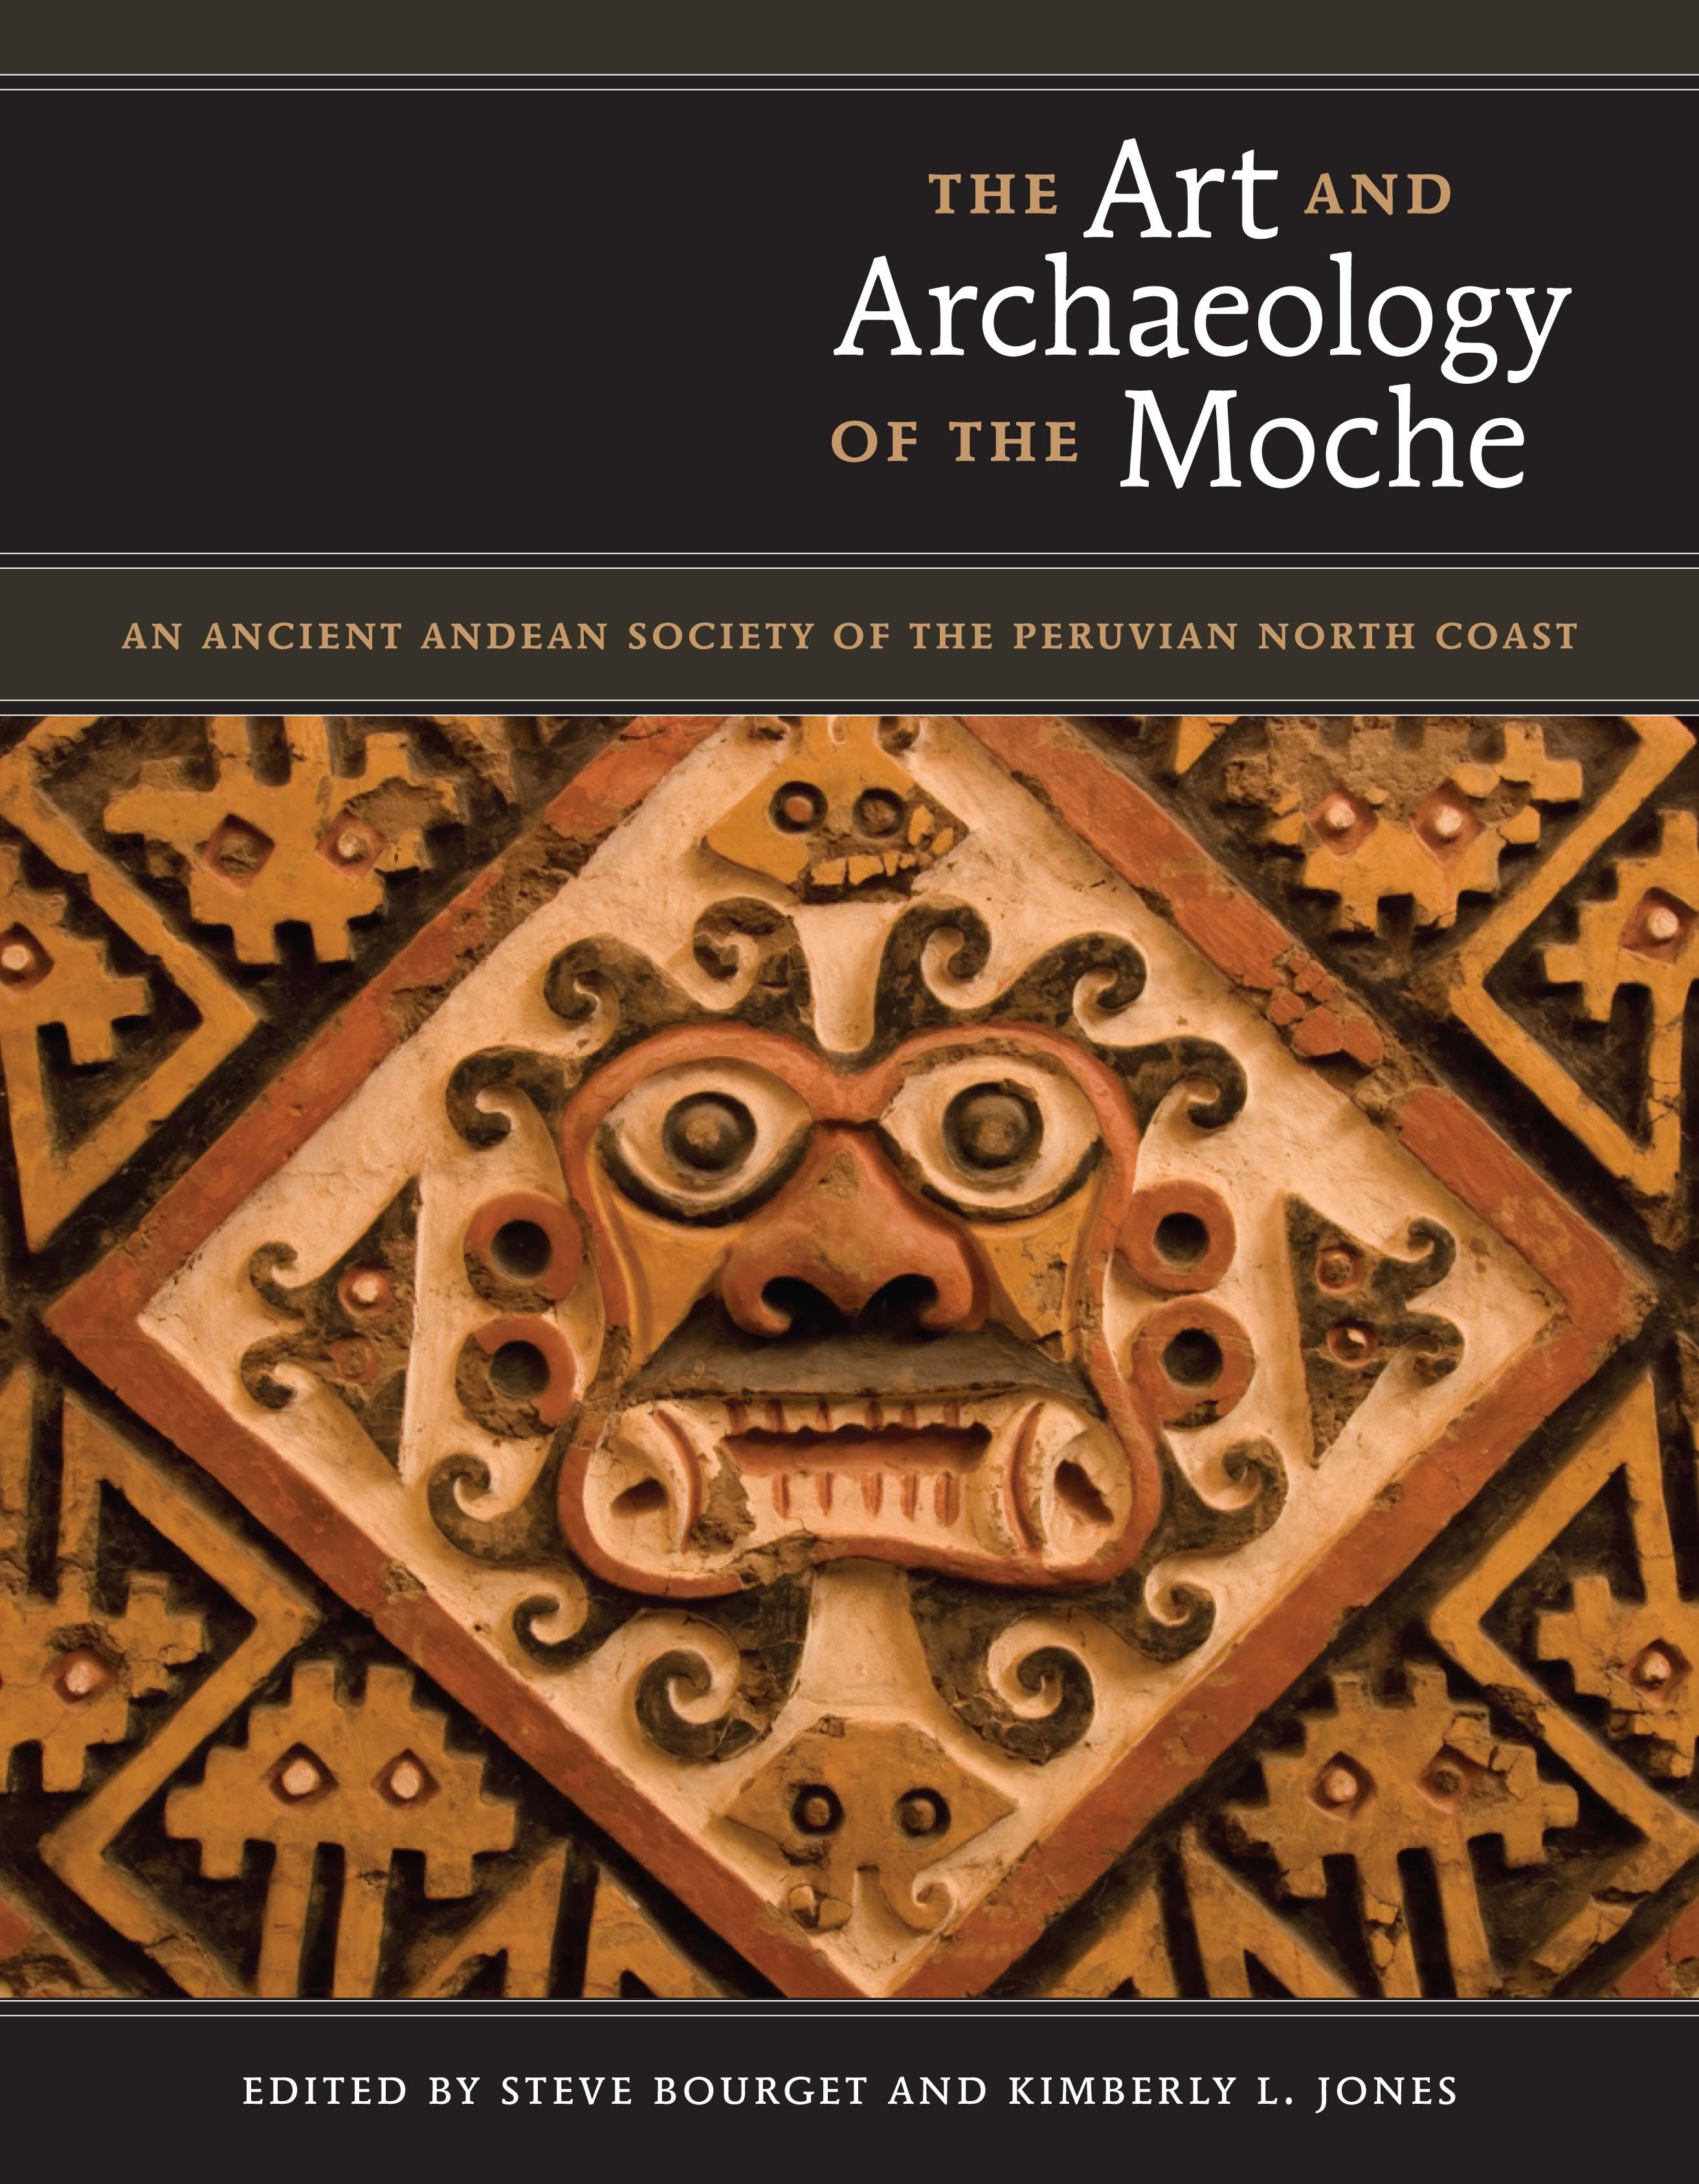 The Art and Archaeology of the Moche